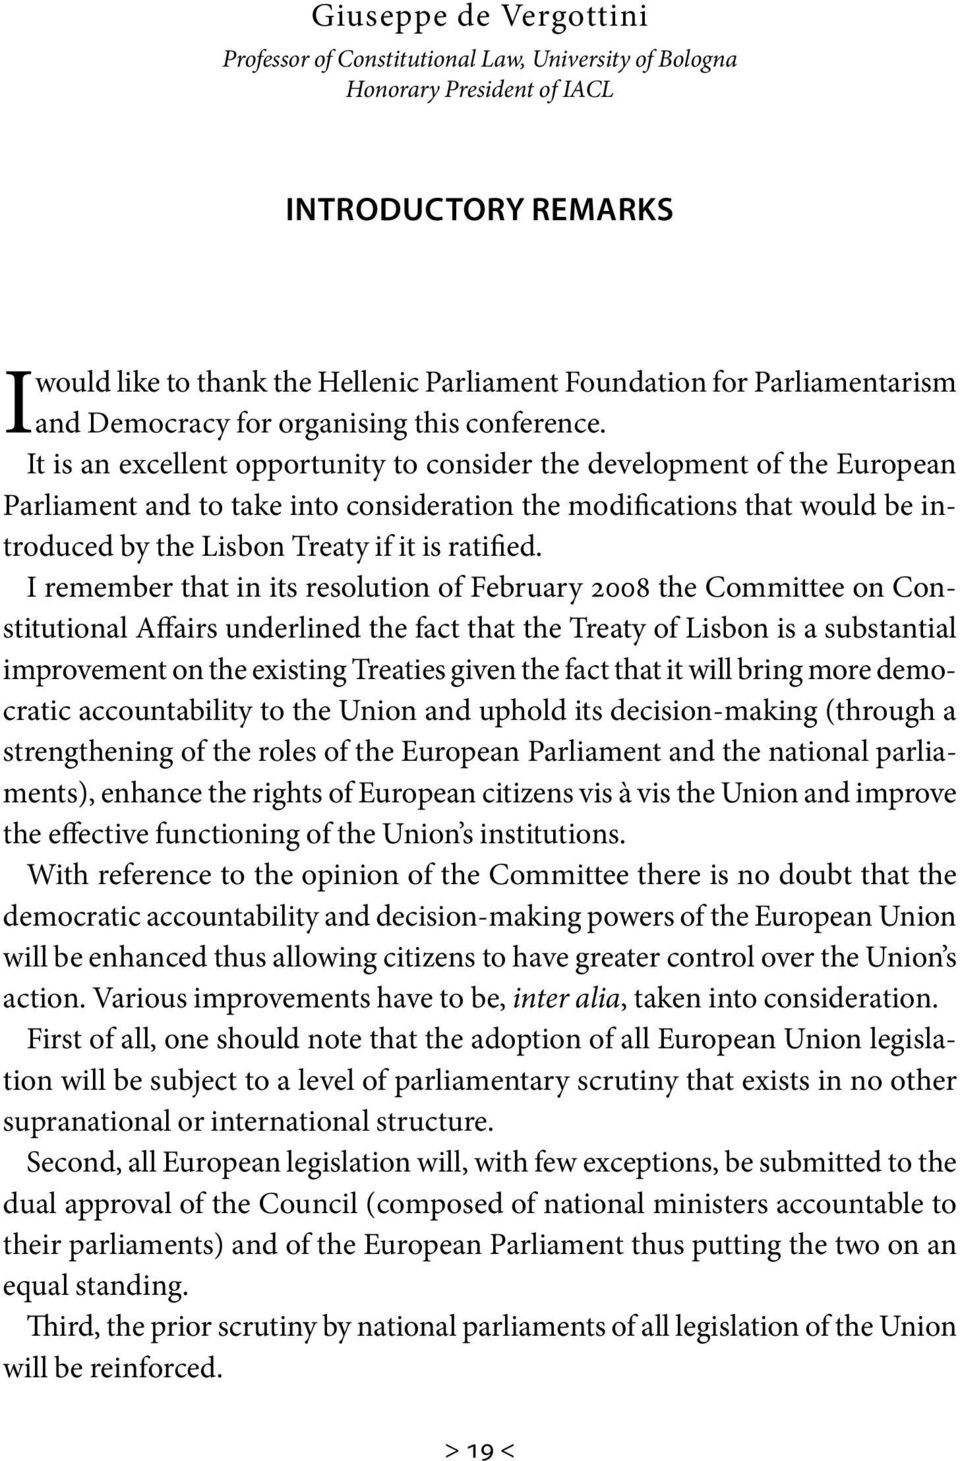 It is an excellent opportunity to consider the development of the European Parliament and to take into consideration the modifications that would be introduced by the Lisbon Treaty if it is ratified.